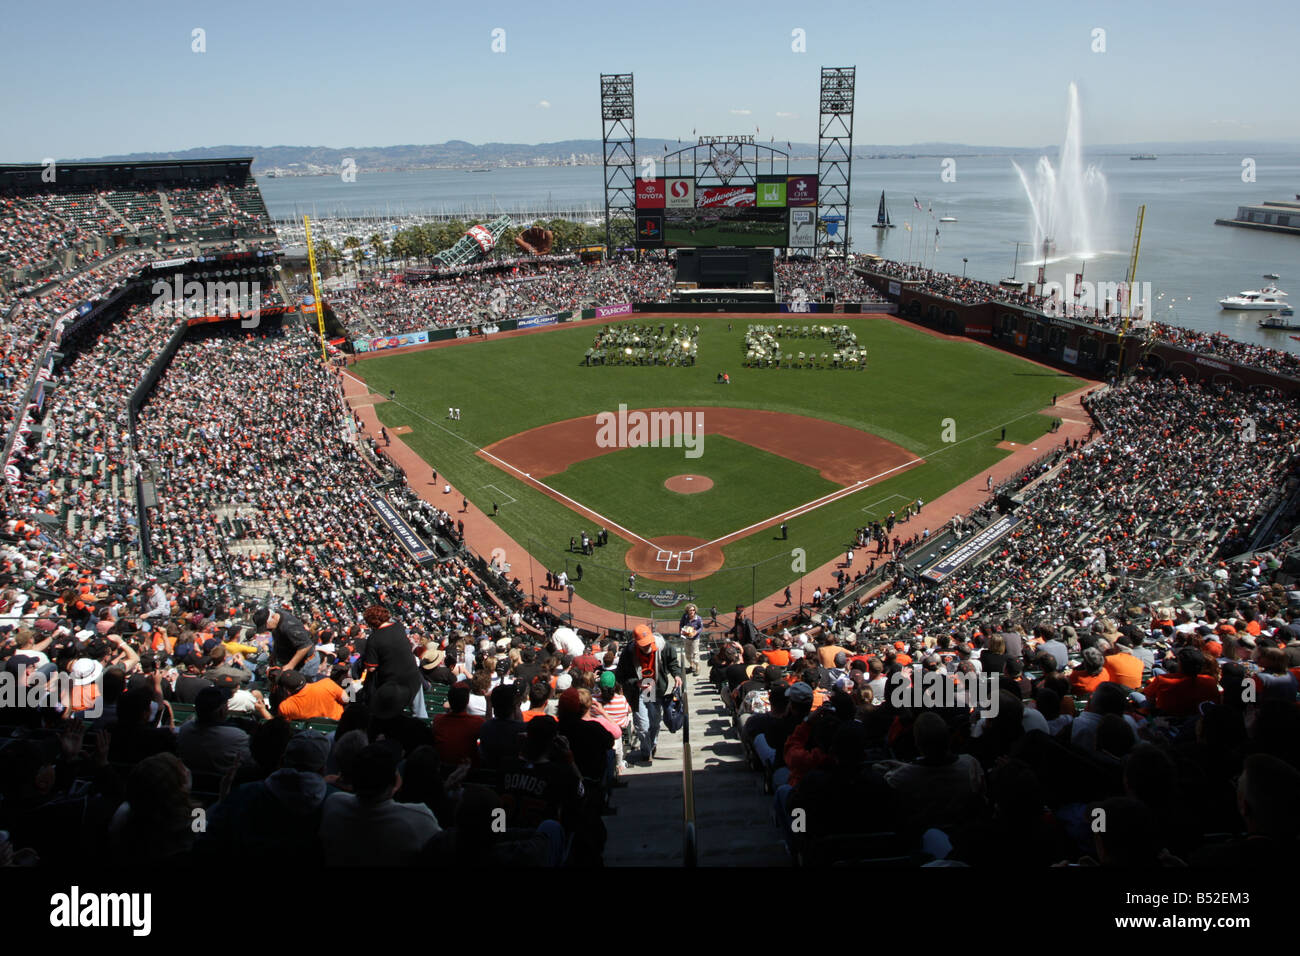 AT&T Park celebrates the 50th anniversary of the San Francisco Giants on Opening Day of the baseball season on April 7 2008. Stock Photo